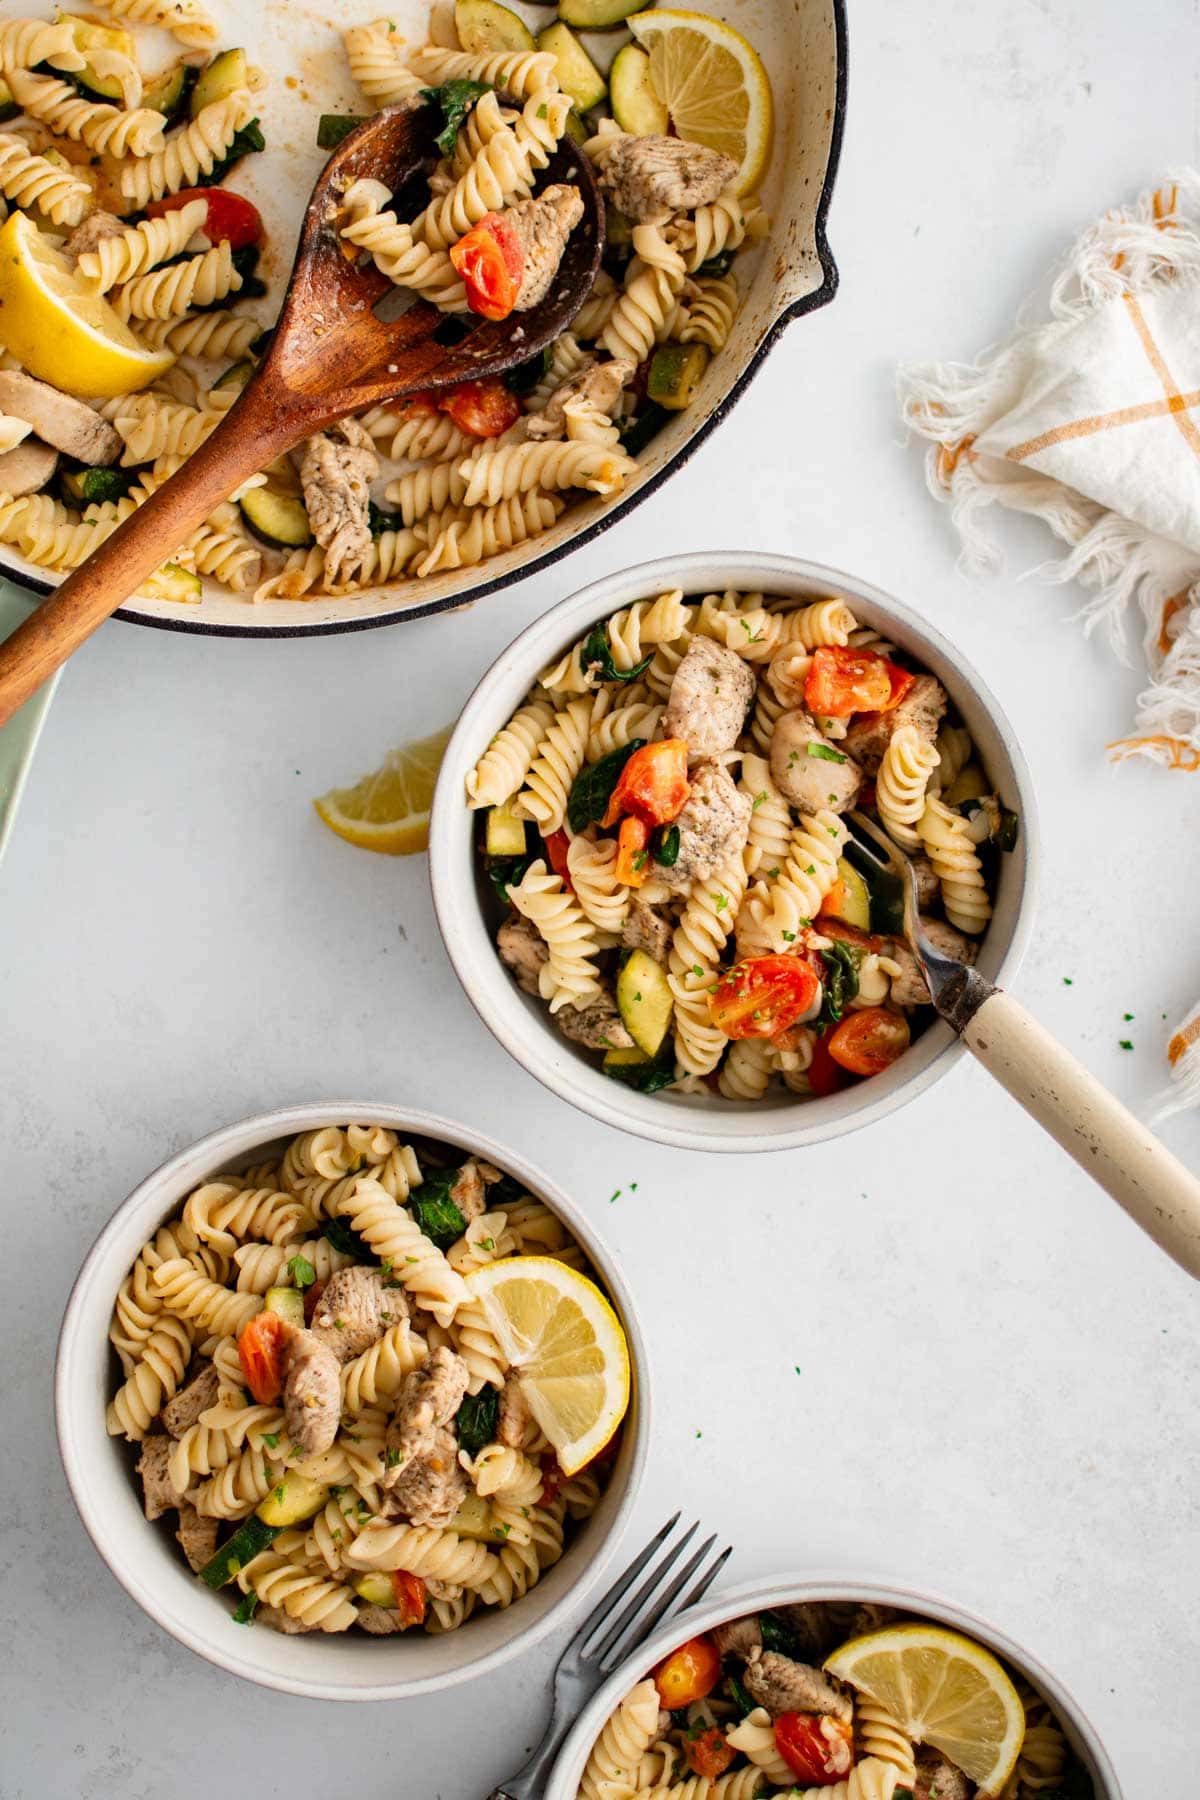 Bowls o fpasta with chicken and vegetables.